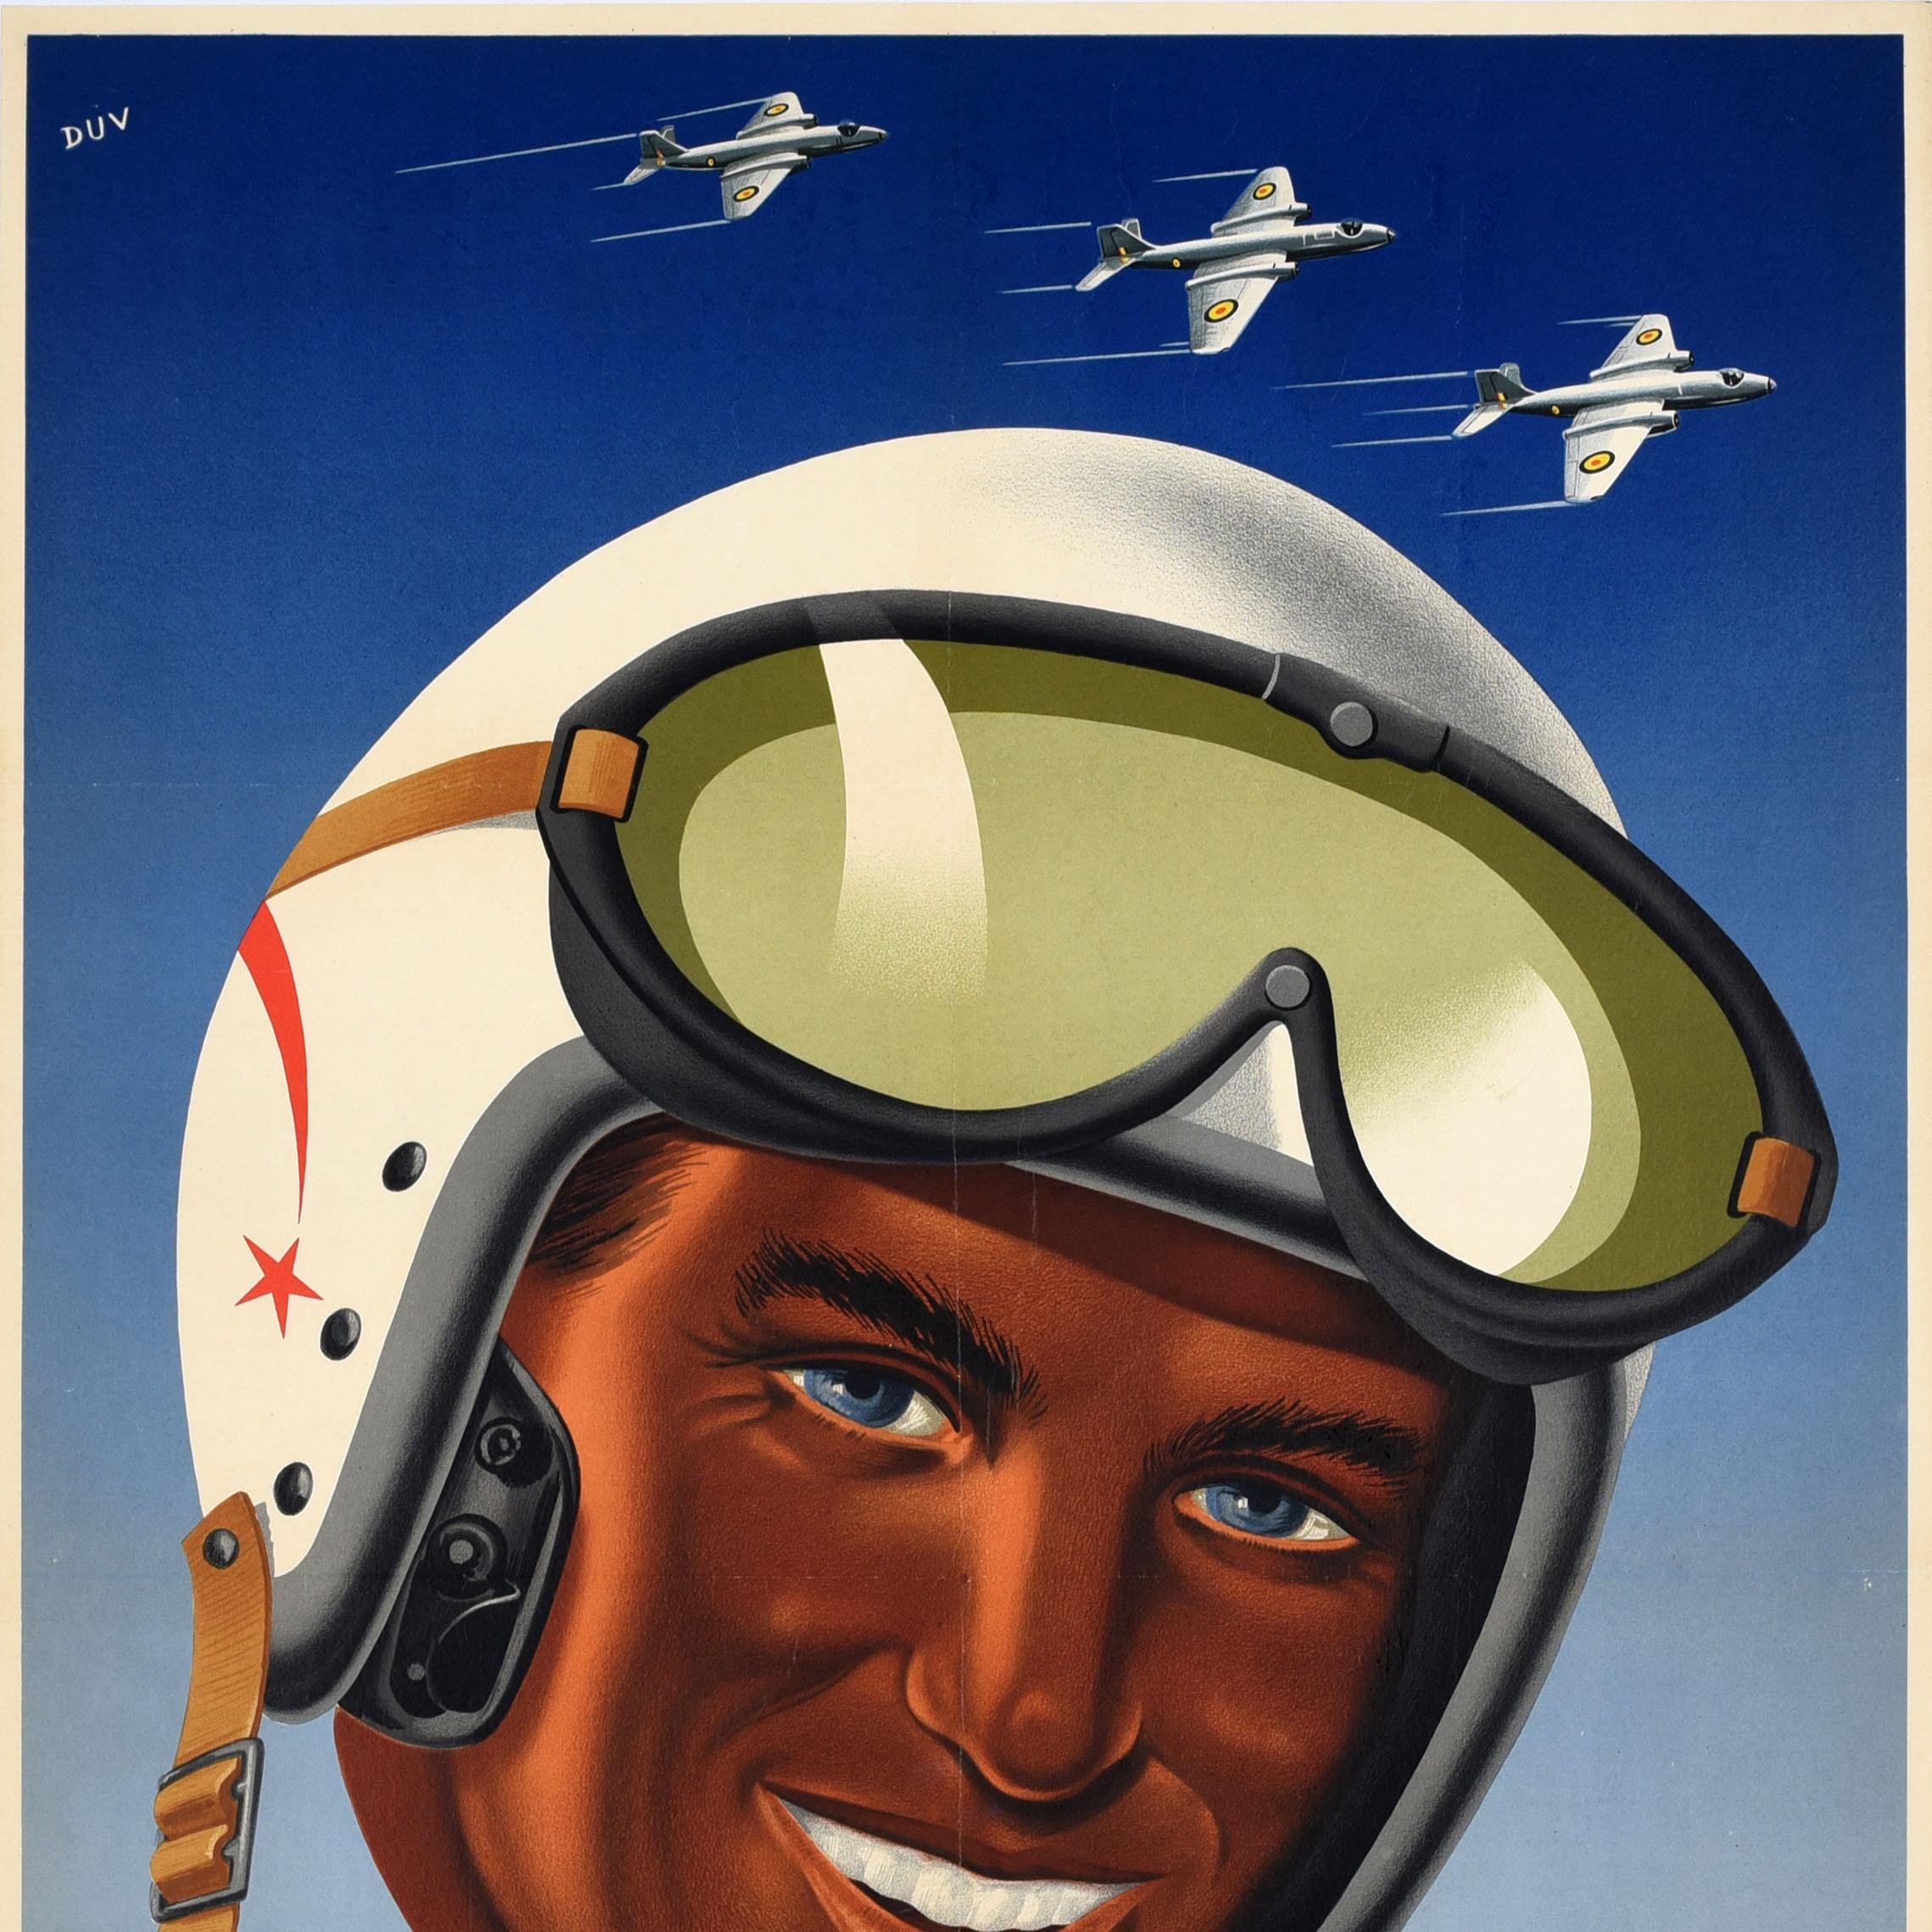 Original vintage recruitment poster - Air Force Pilot ... Your Career / Pilote a la Force Aerienne ... ta carrière! Great design featuring a smiling man wearing a pilot's helmet and goggles with three military planes flying overhead on a blue